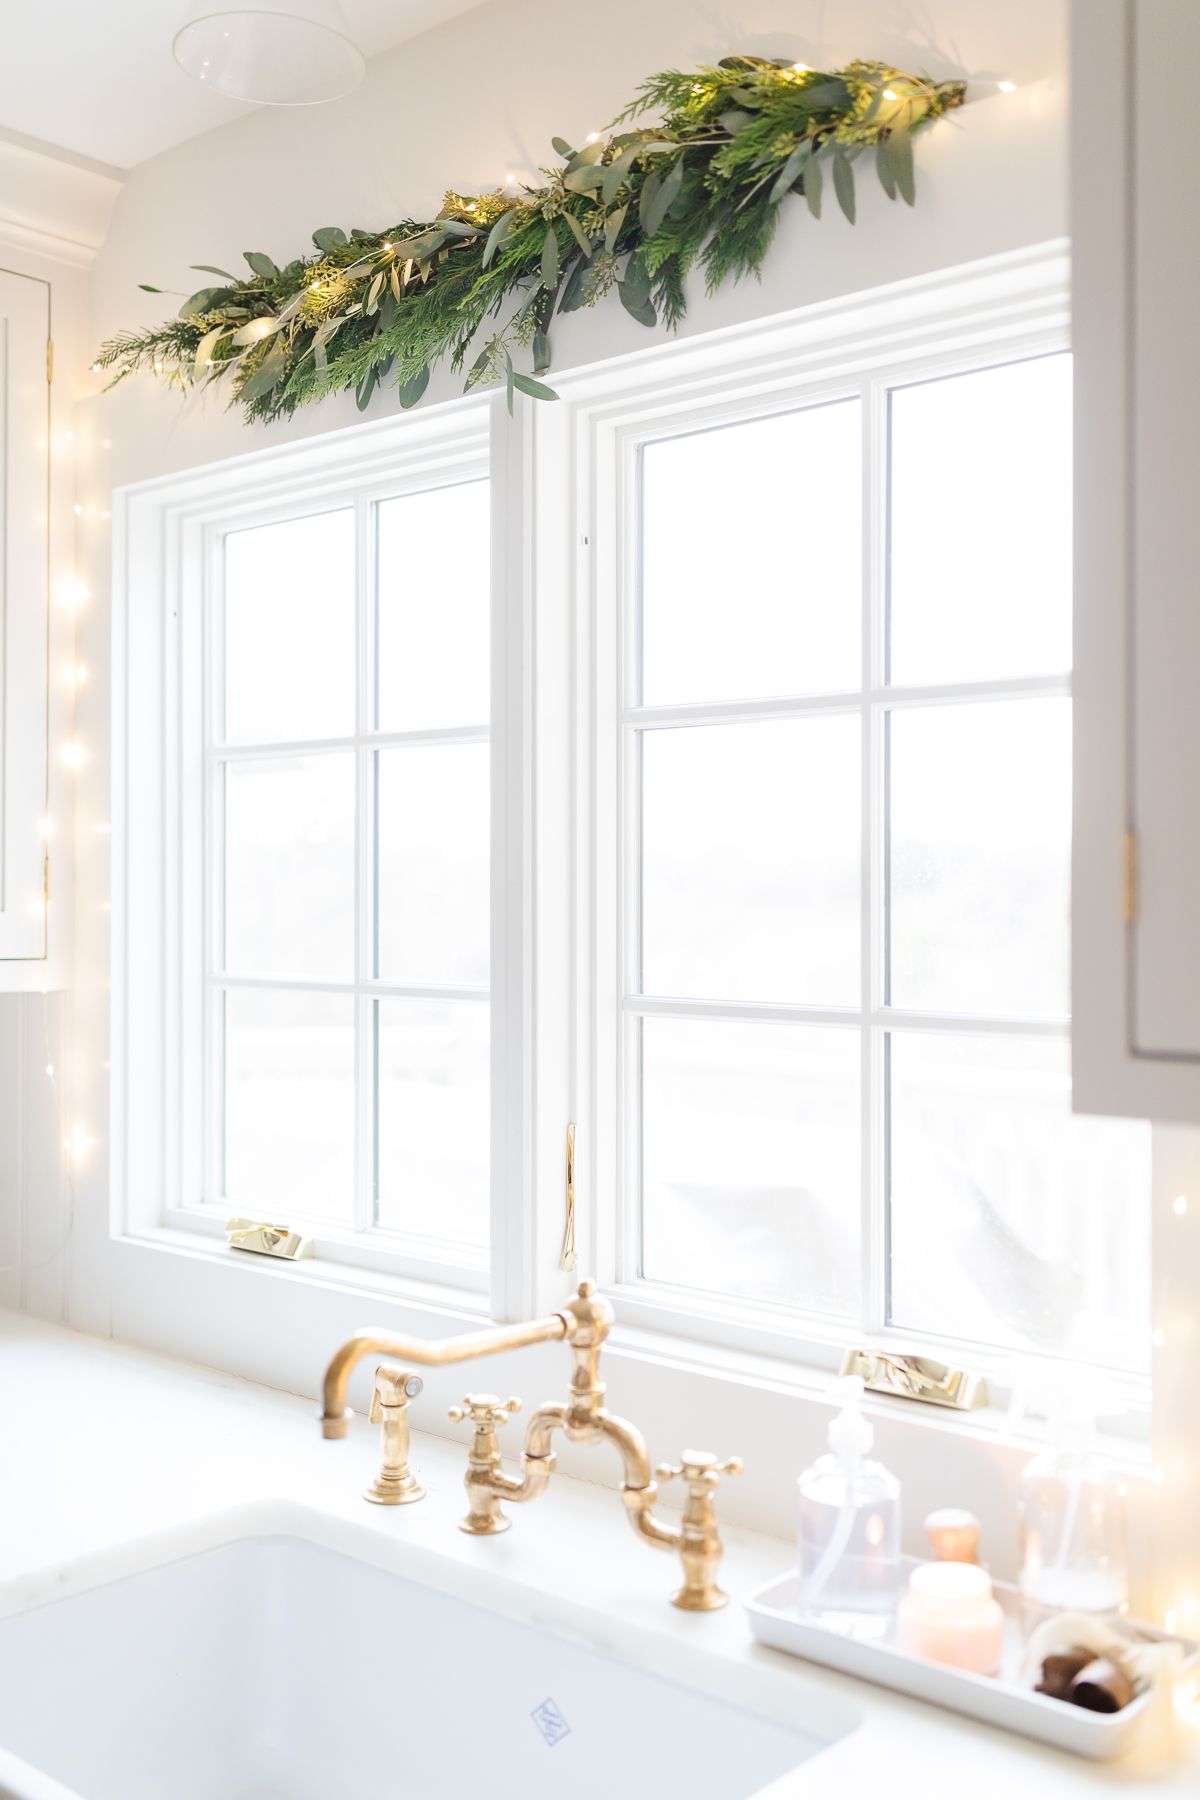 Fresh Christmas greens and lights over a kitchen window